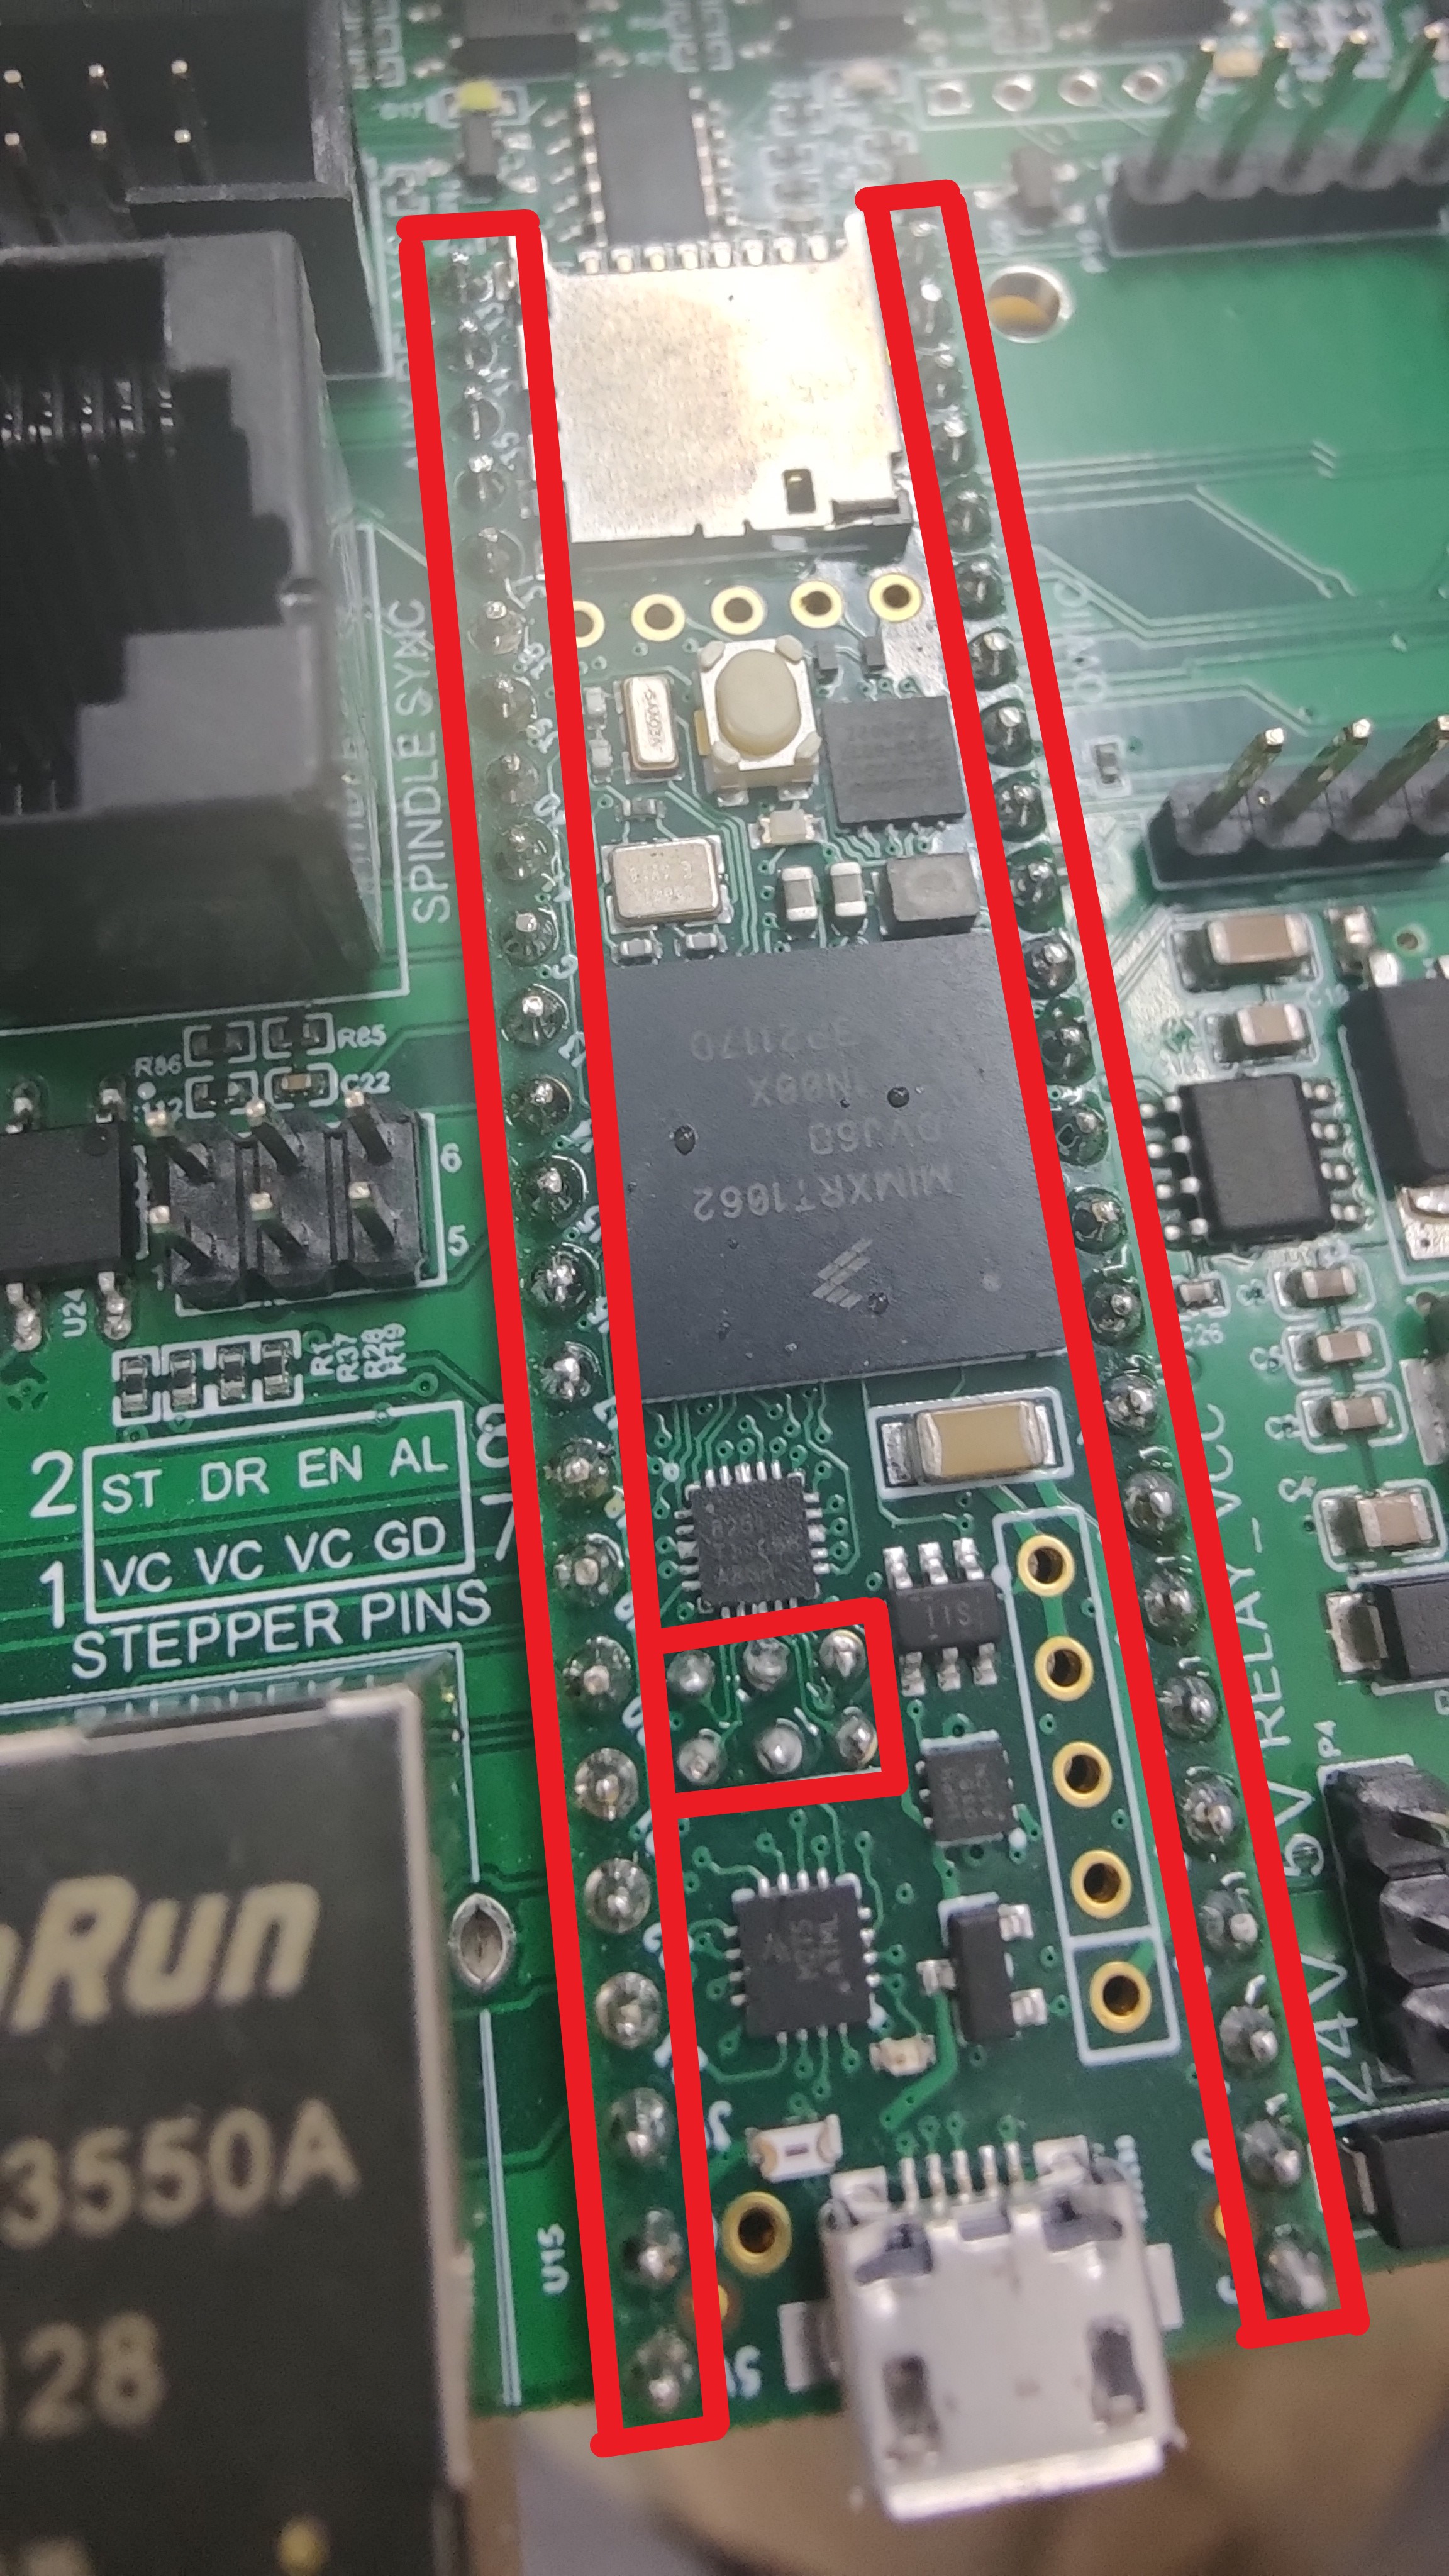 click here, to see which pins to solder on the teensy